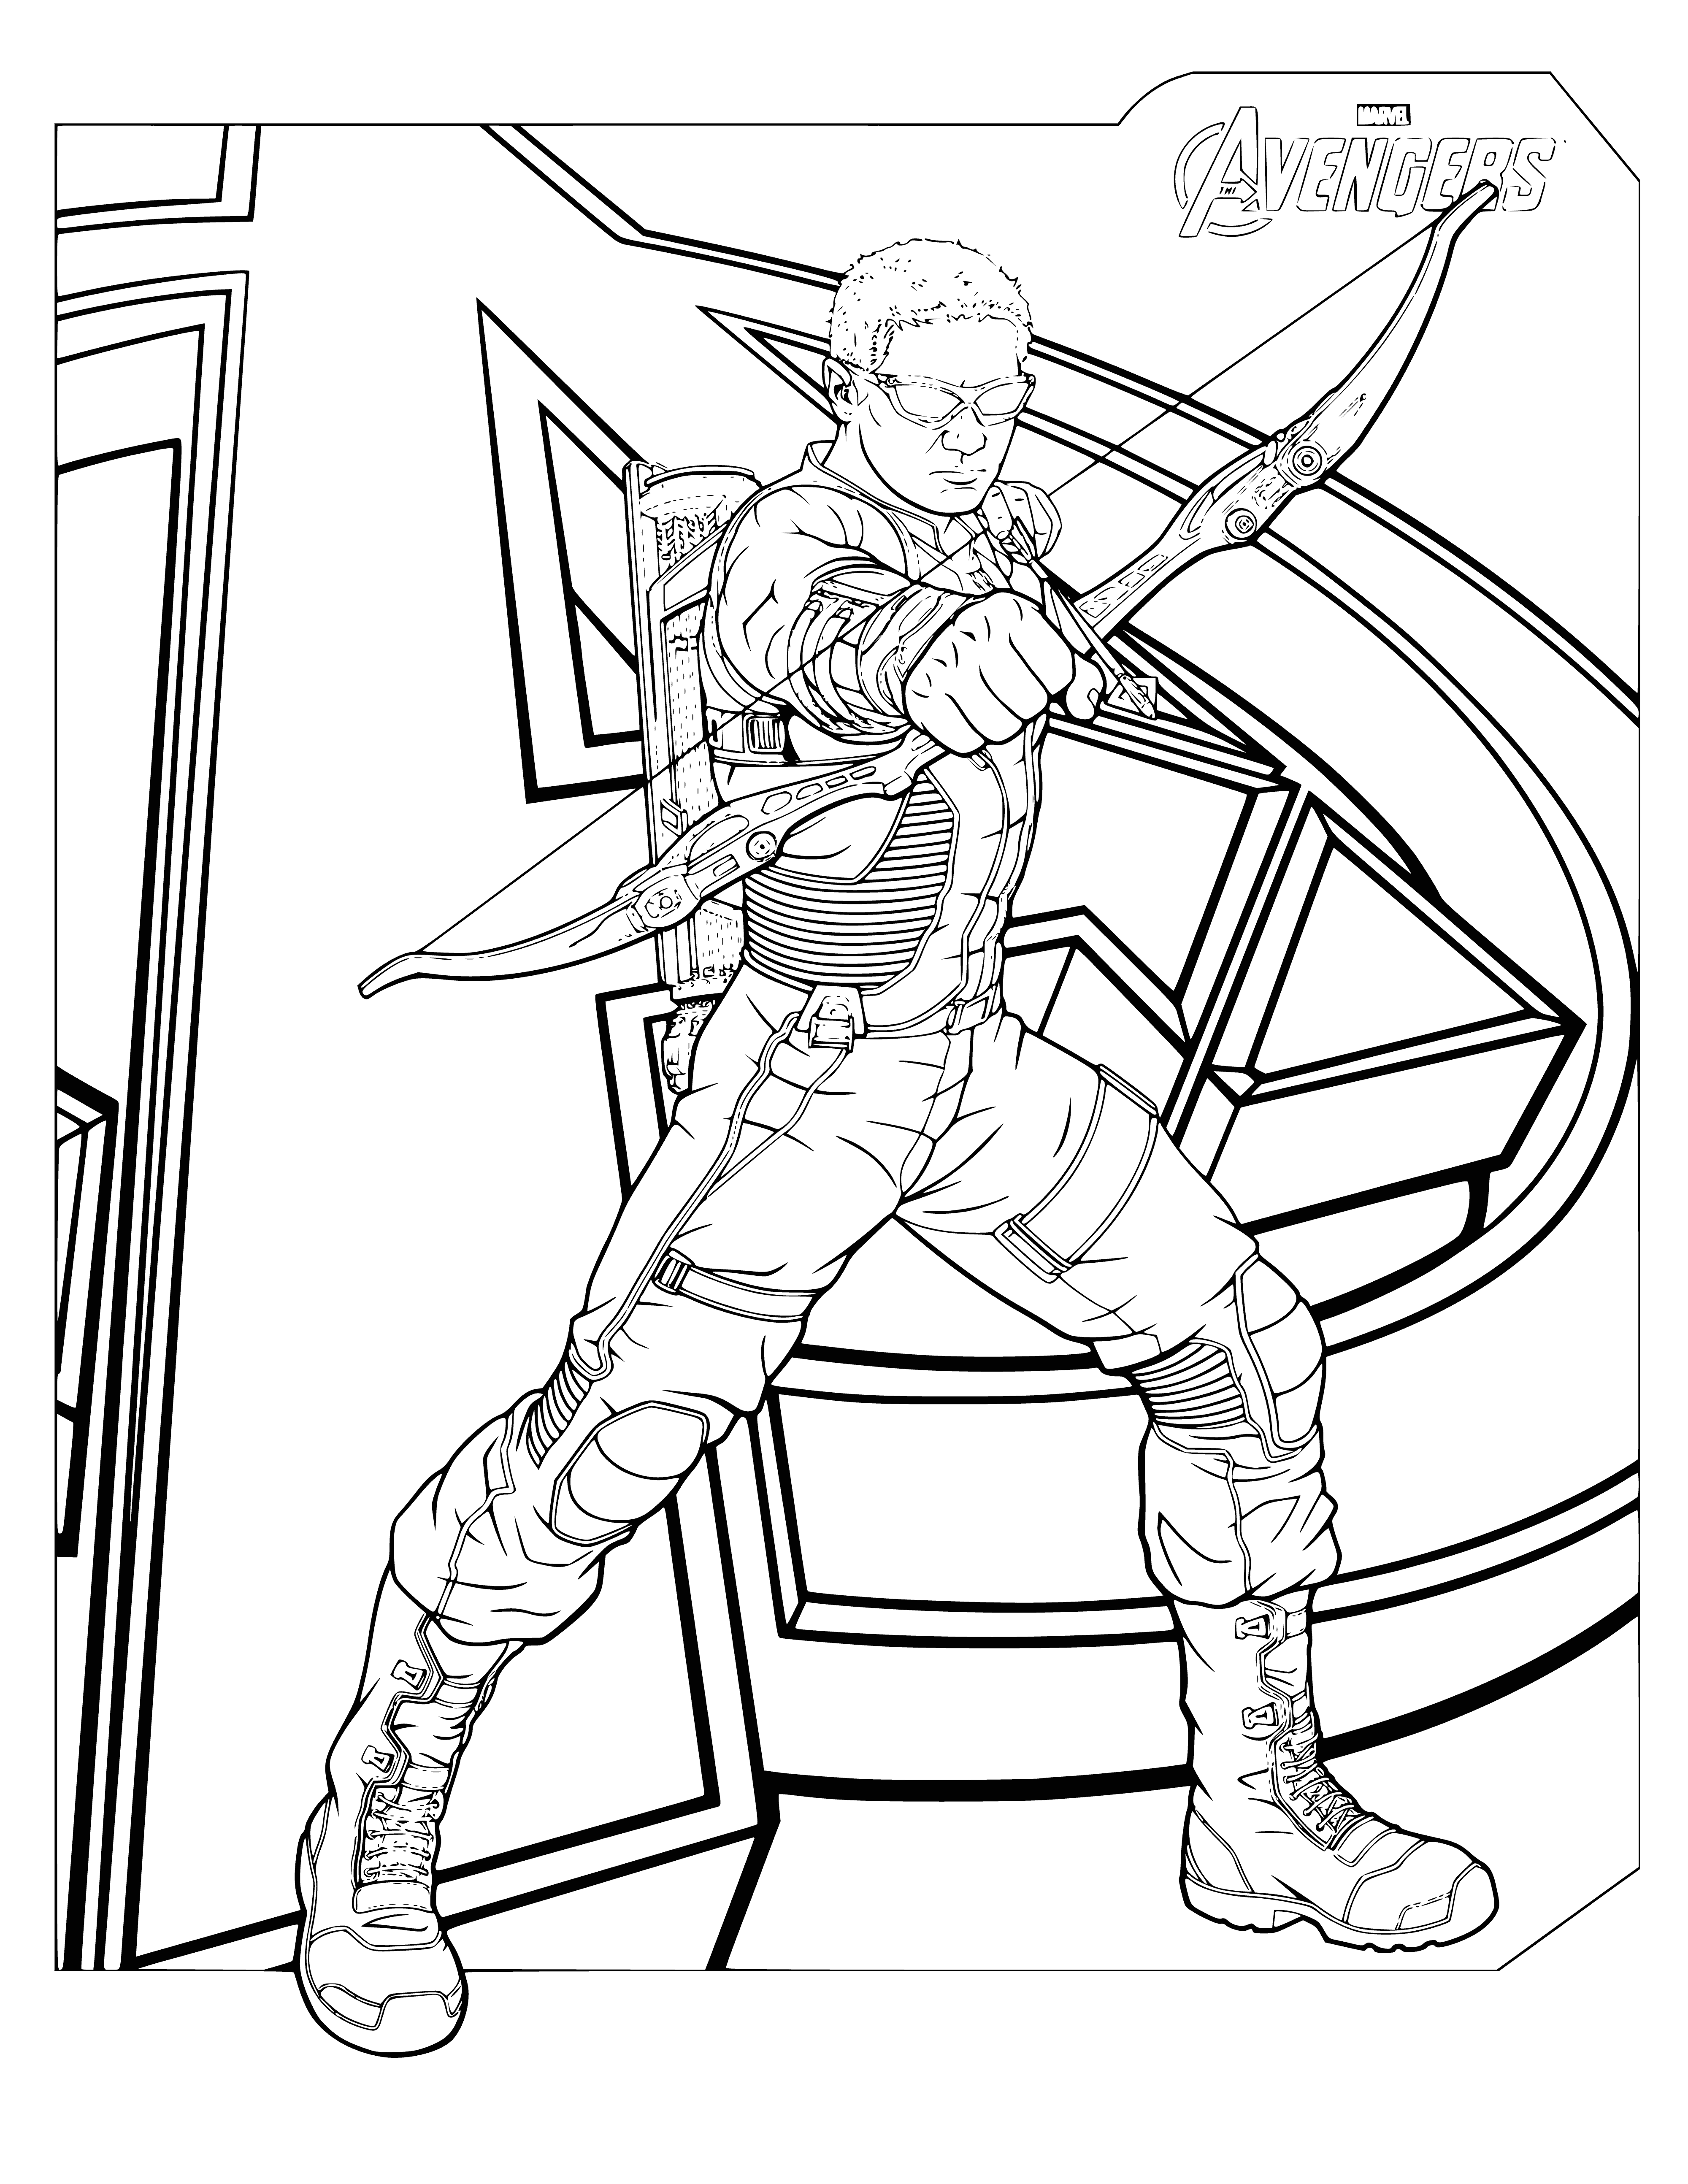 coloring page: Hawkeye stands tall, bow in left hand, arrow in right, quiver on back. He wears a purple shirt, black vest/pants. Brown hair, blue eyes.